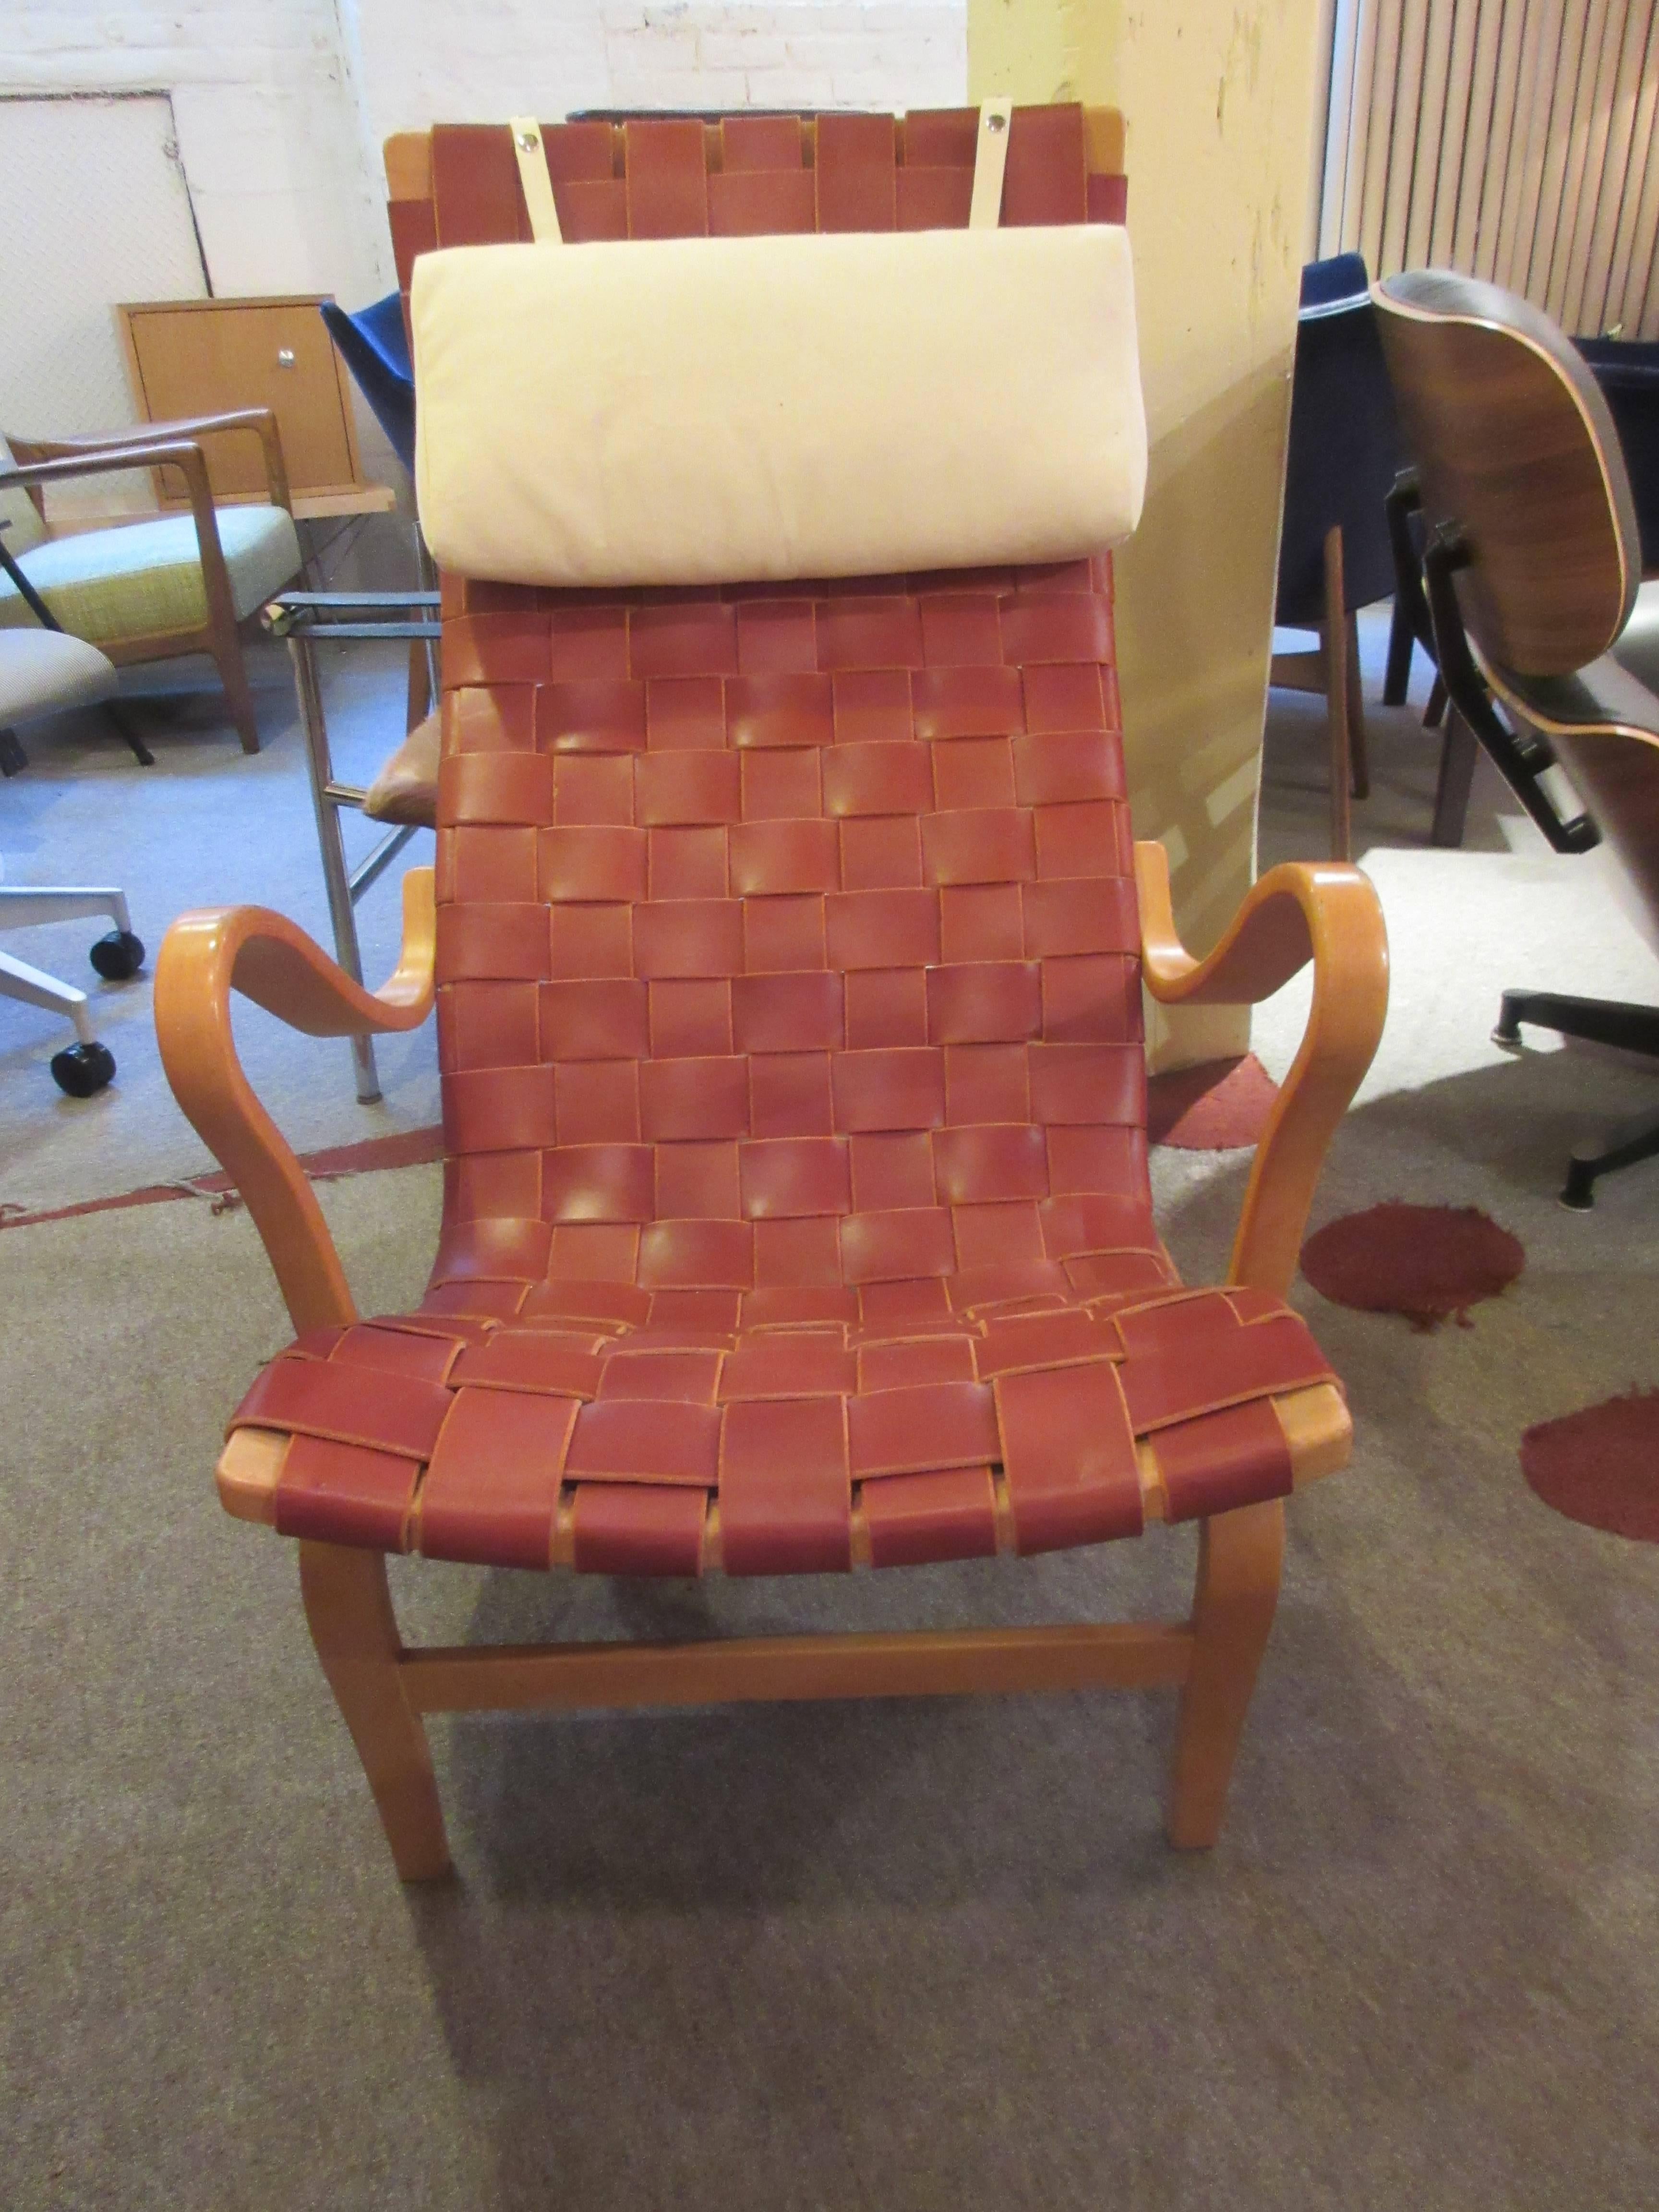 Large upright lounge chair restrapped in chestnut leather on bentwood frame with adjustable canvas head cushion. Originally designed in 1934 this is a 1960s version.